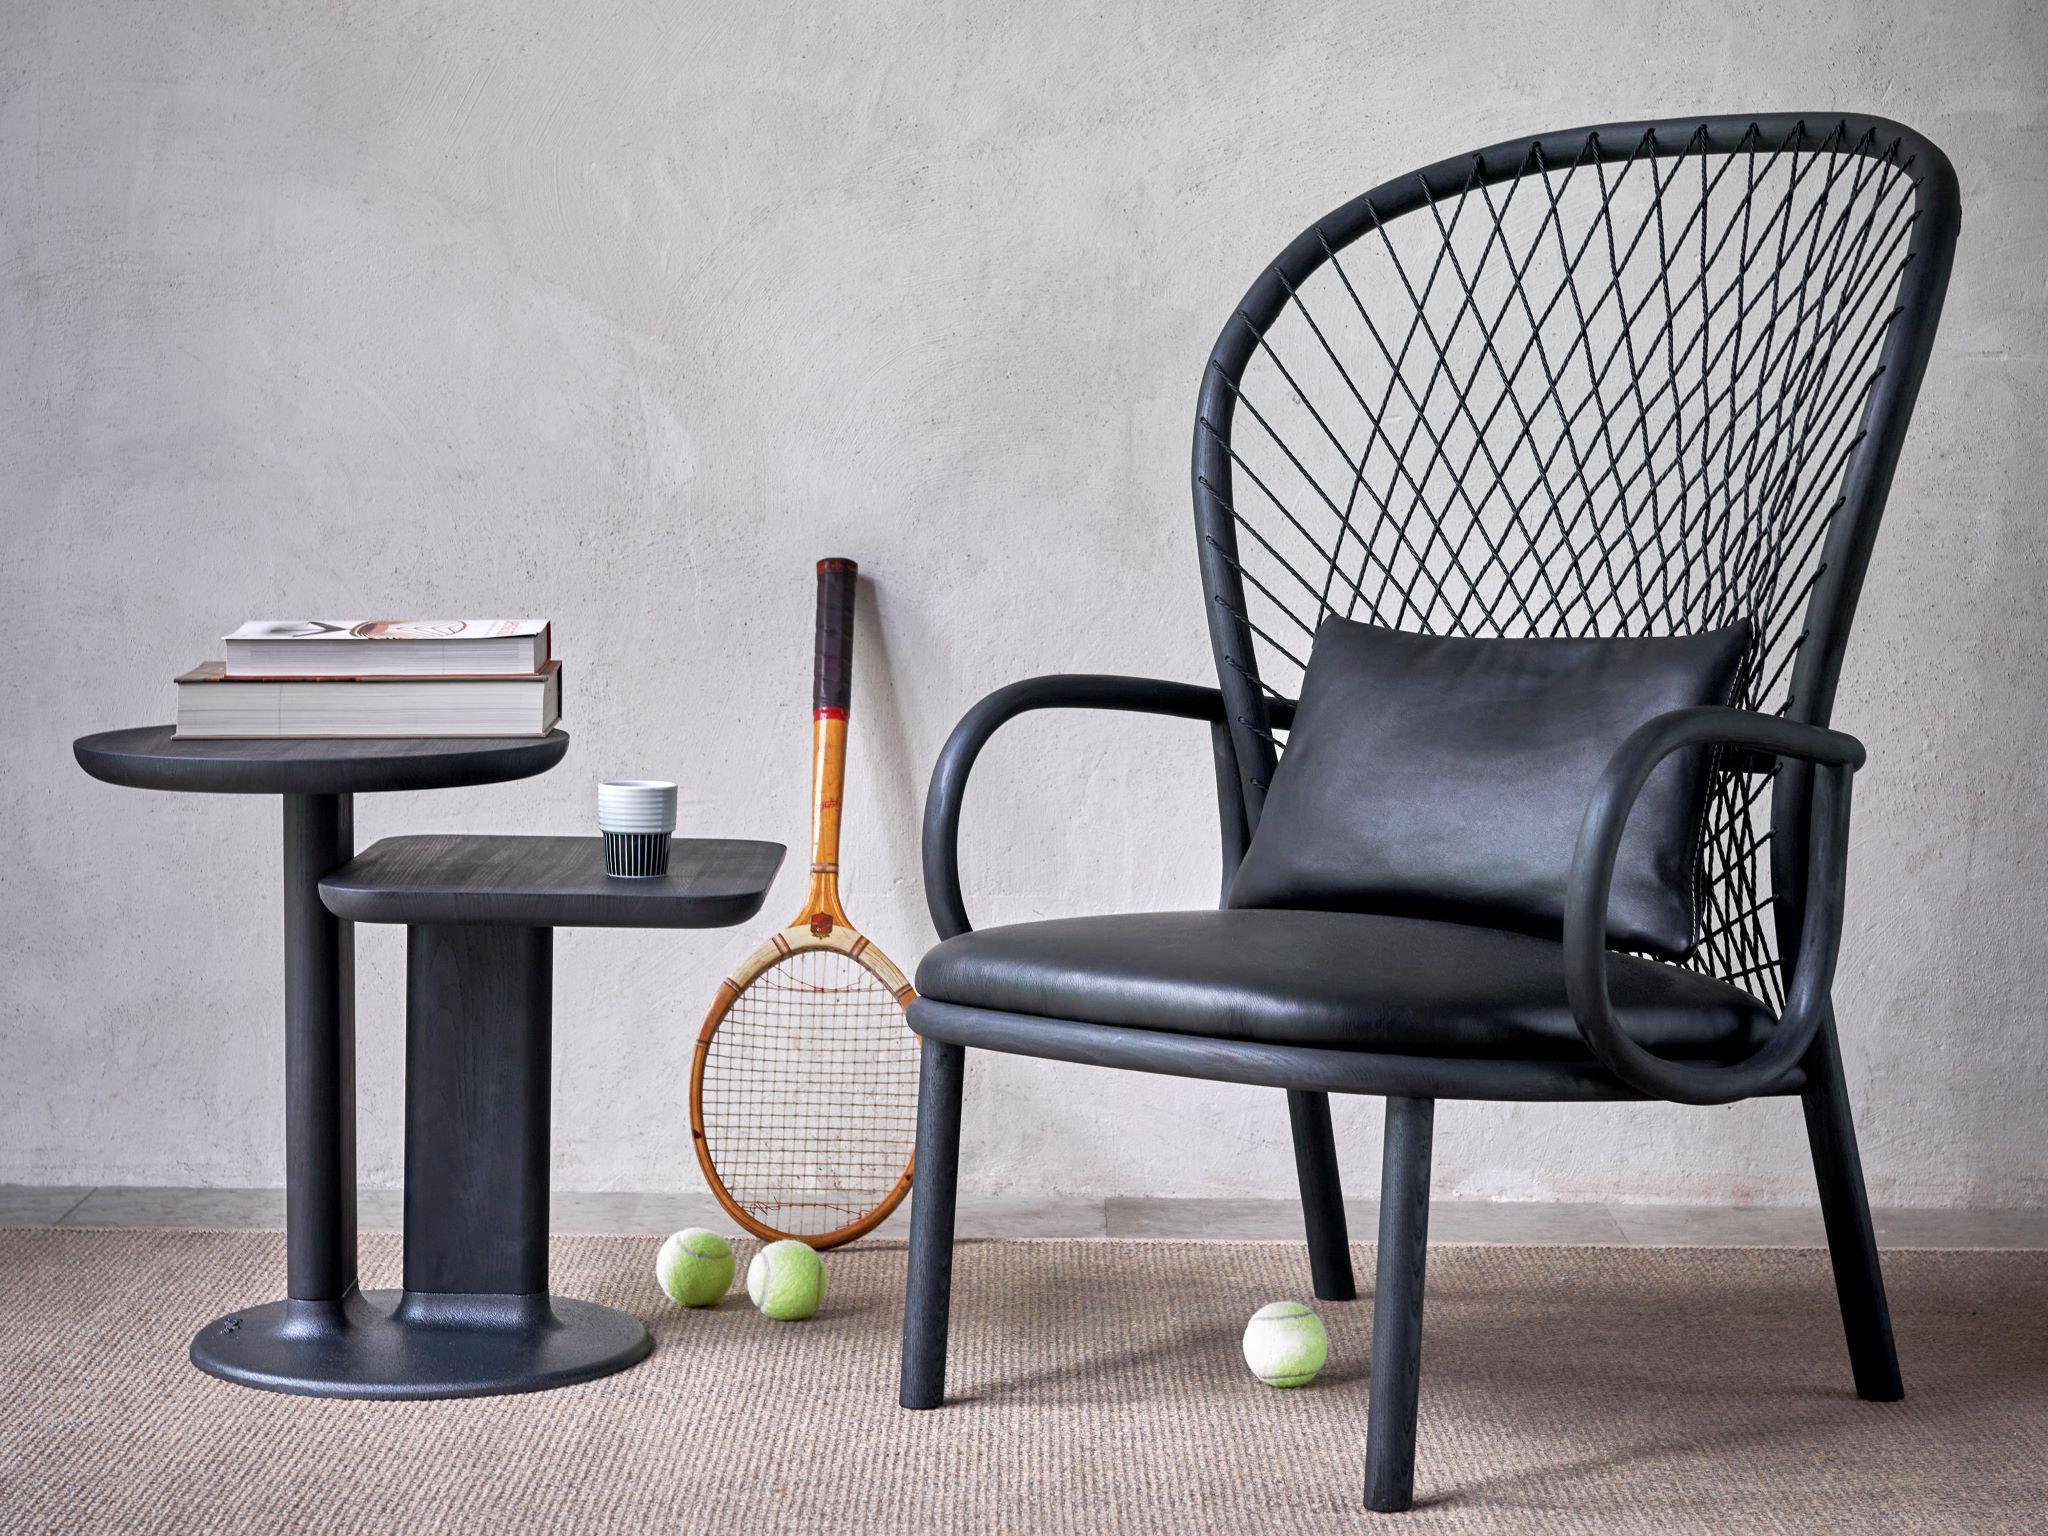 A black armchair next to a table. A tennis racket and balls in the background.